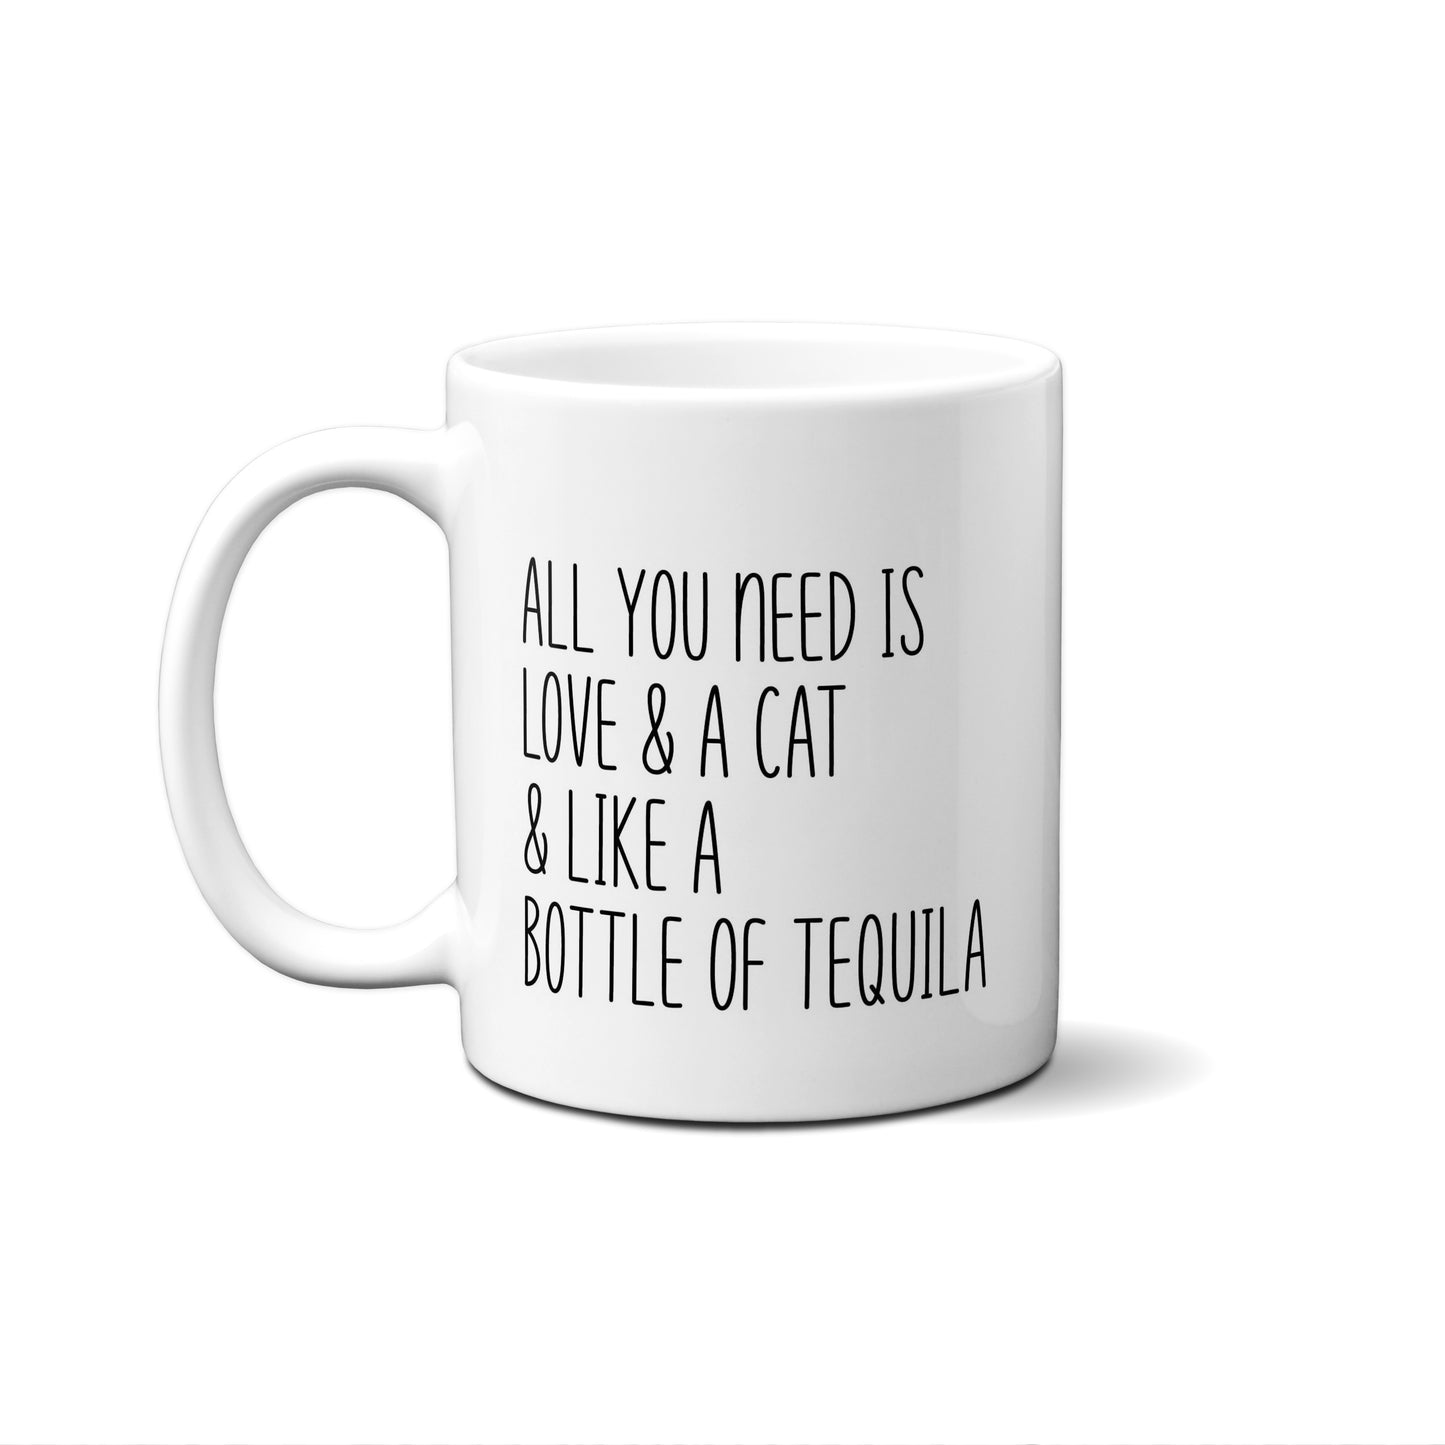 All You Need Is Love & A Cat & Like A Bottle Of Tequila Quote Mug